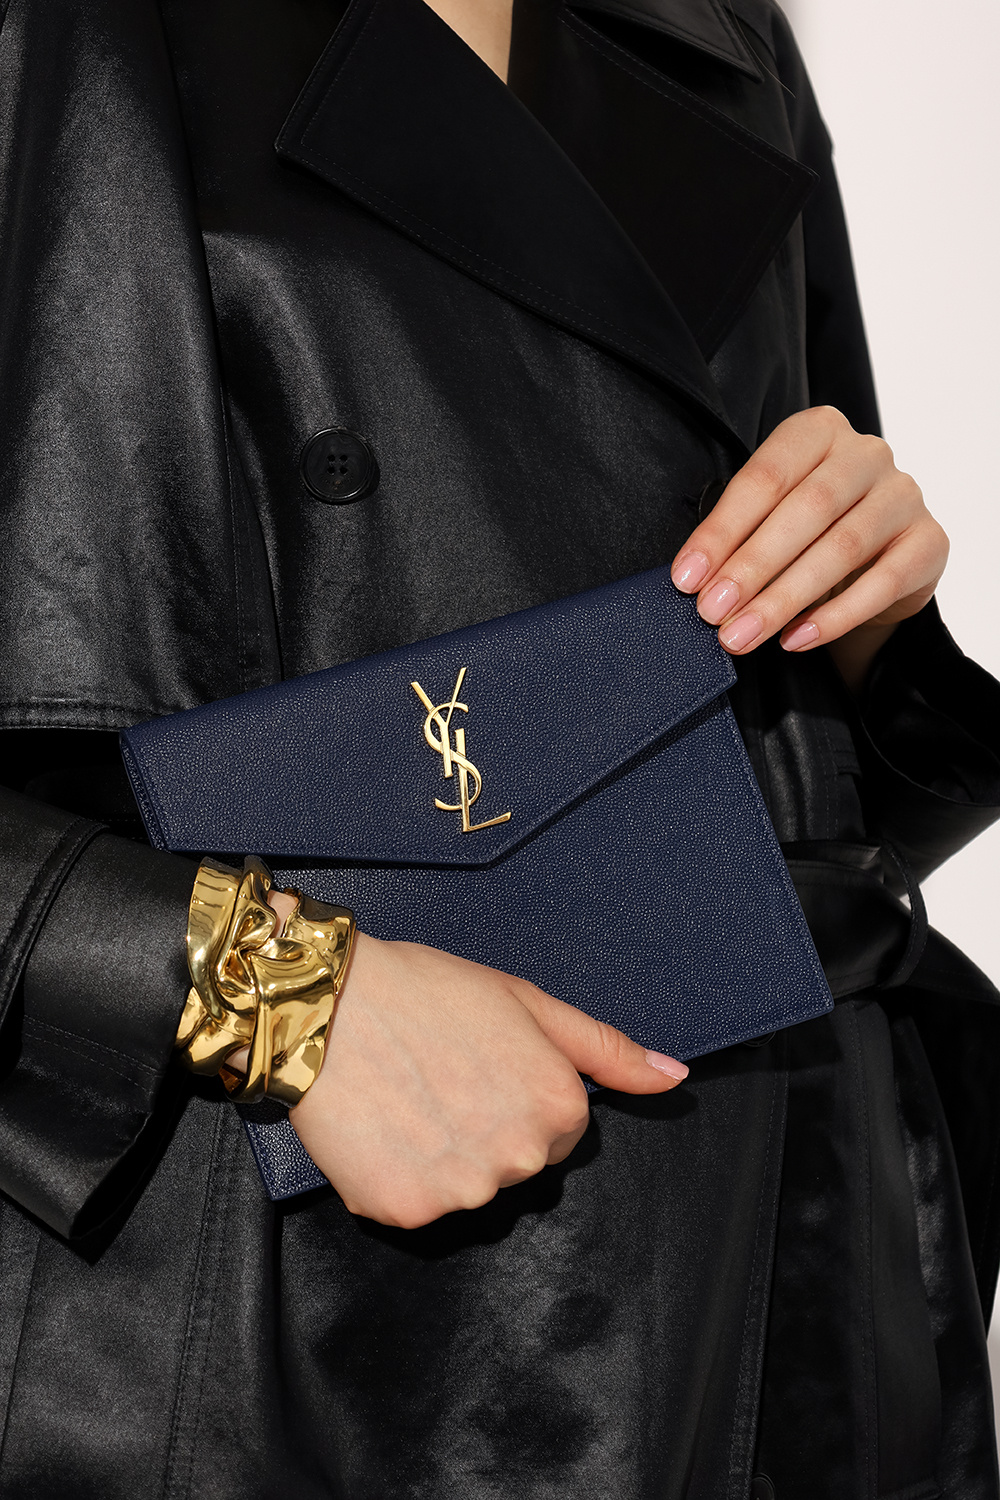 Saint Laurent 'Uptown Baby Small' clutch with logo